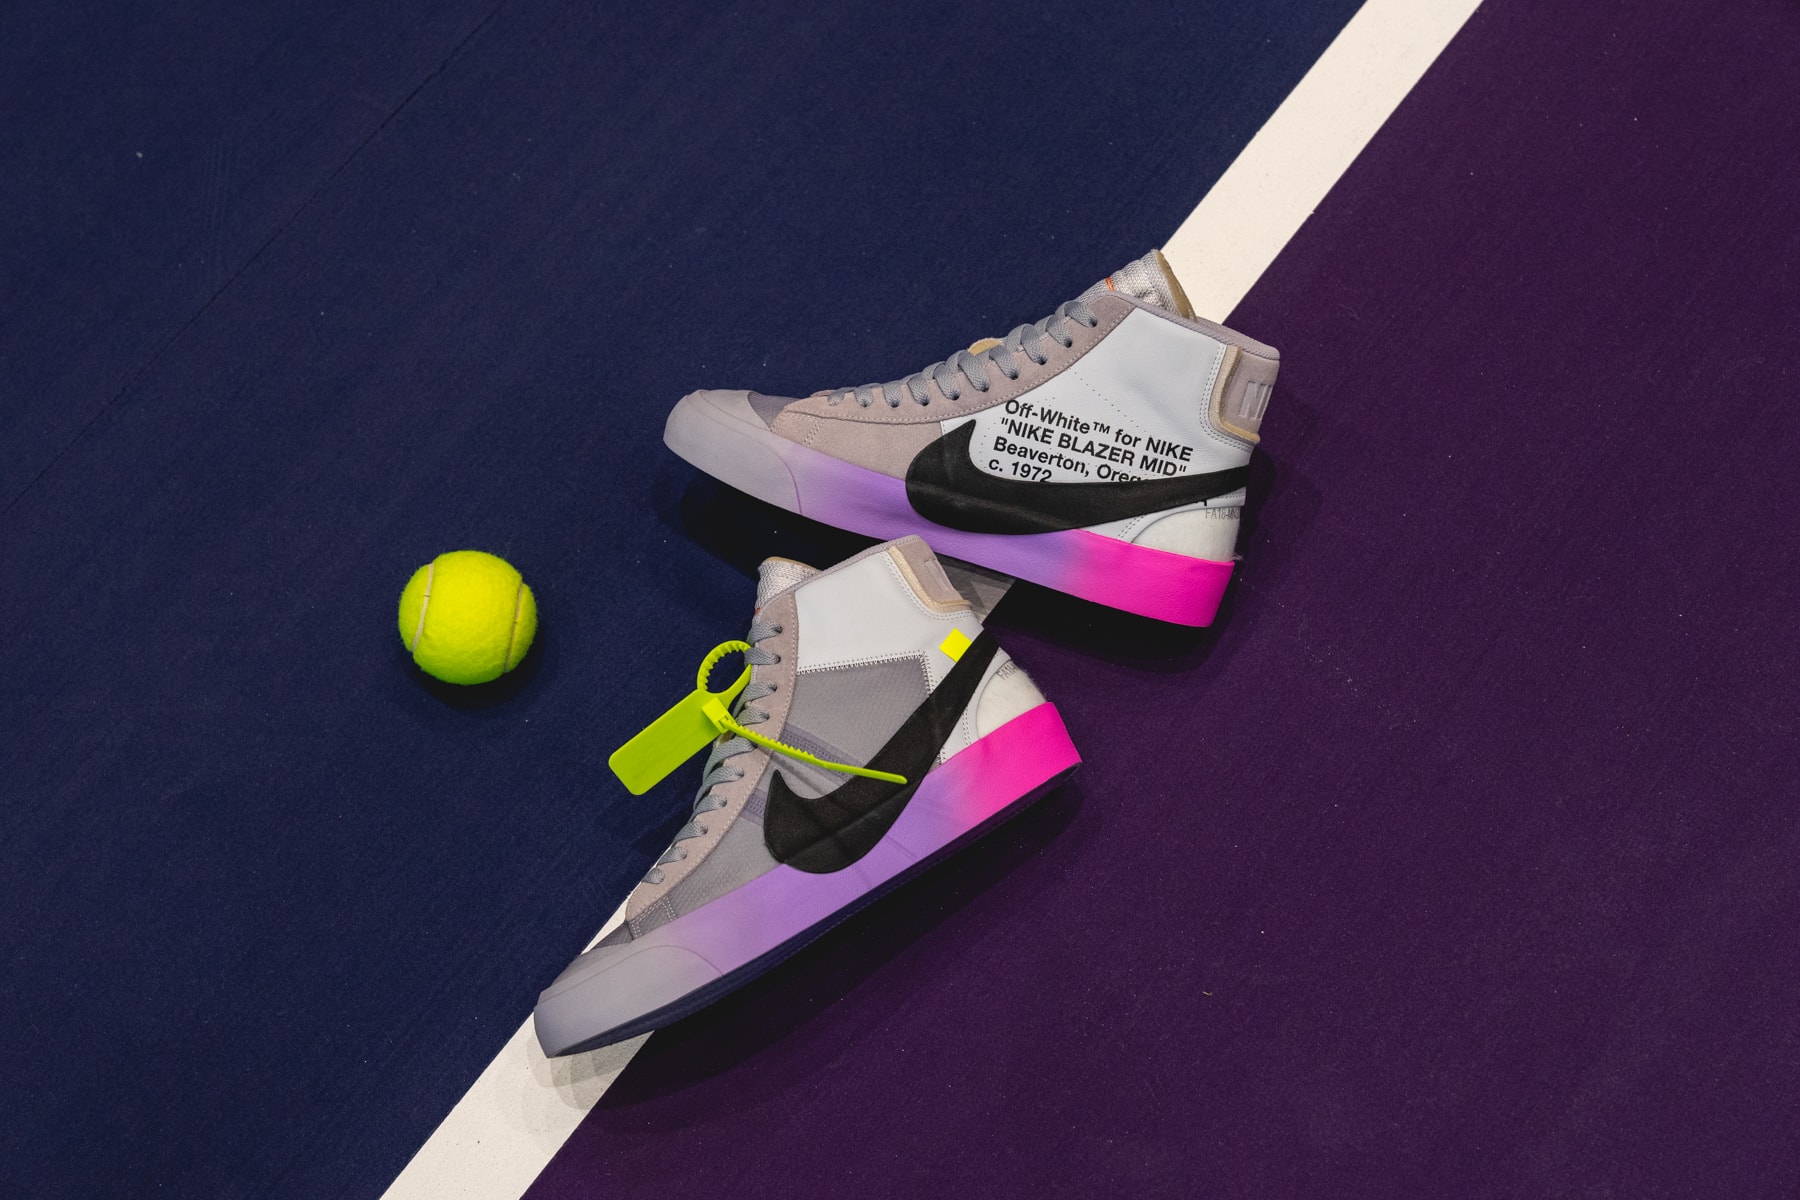 serena williams off white nike queen 2018 footwear nike court